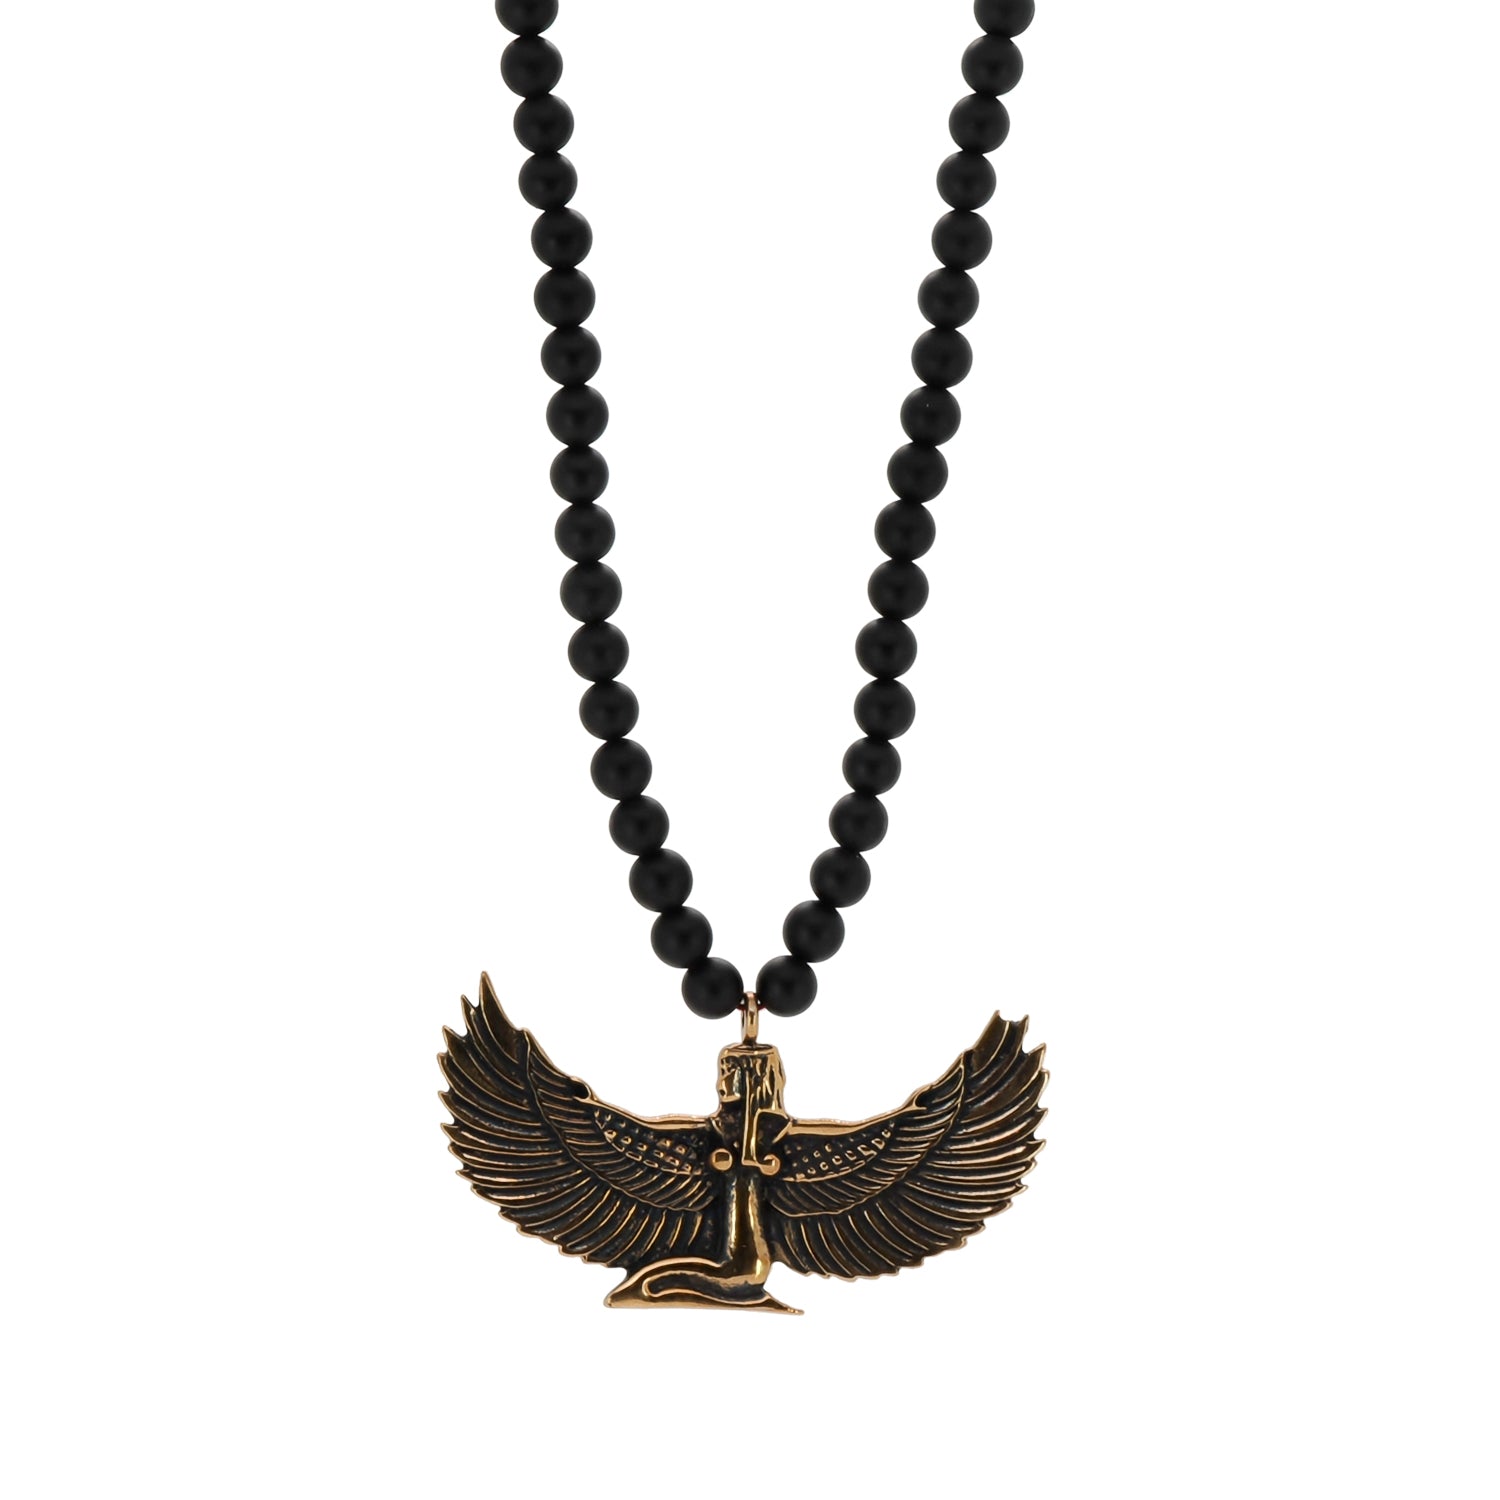 Bronze Isis Pendant Necklace with Black Onyx Beads